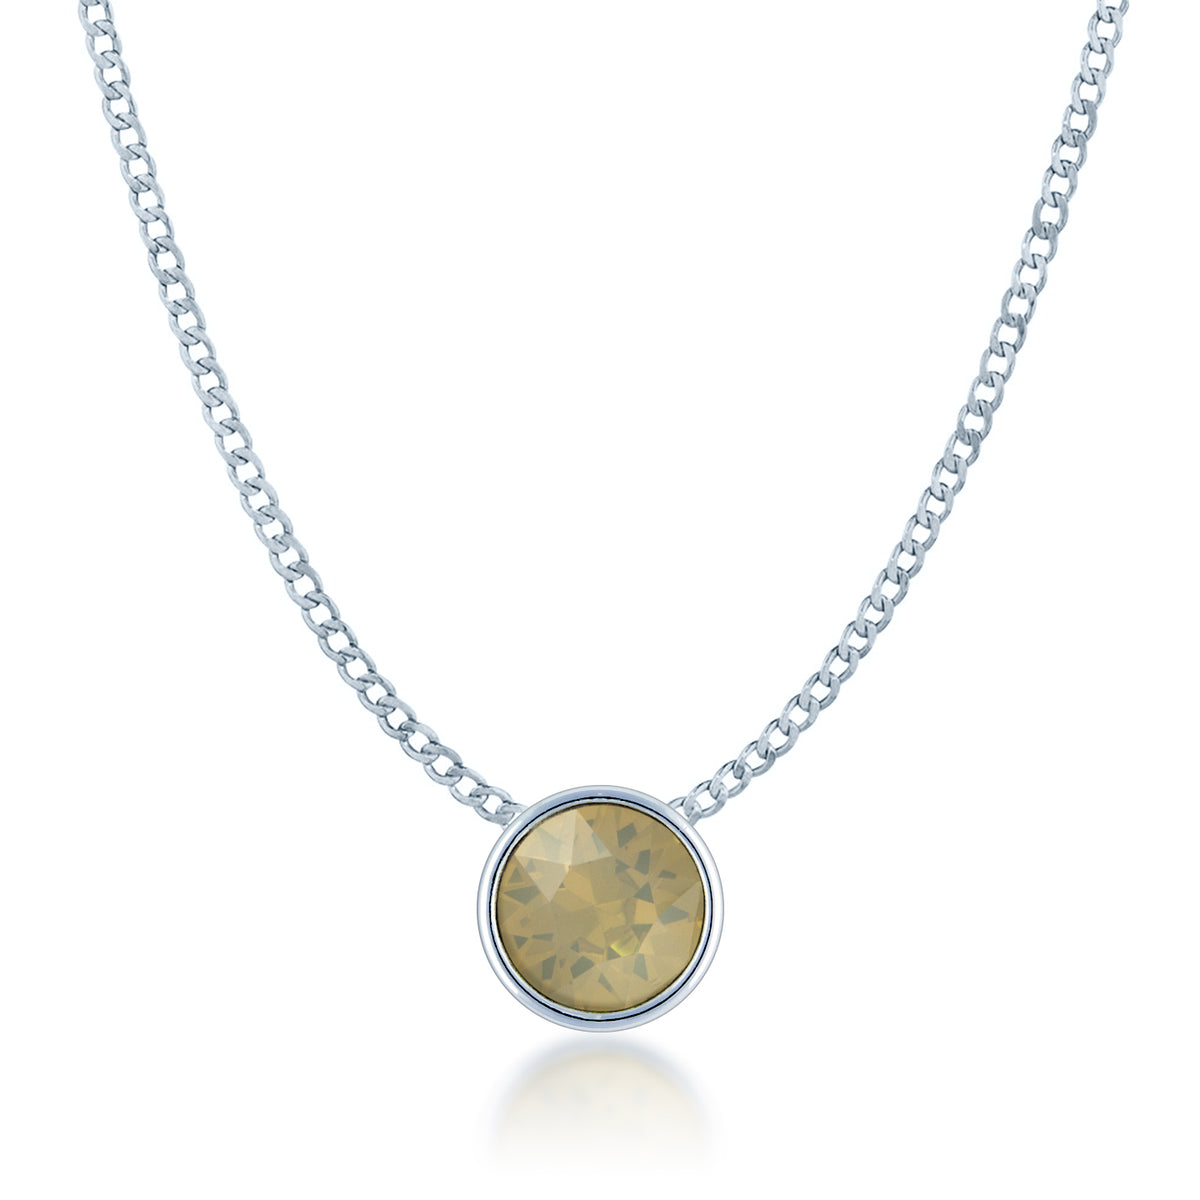 Harley Small Pendant Necklace with Beige Sand Round Opals from Swarovski Silver Toned Rhodium Plated - Ed Heart